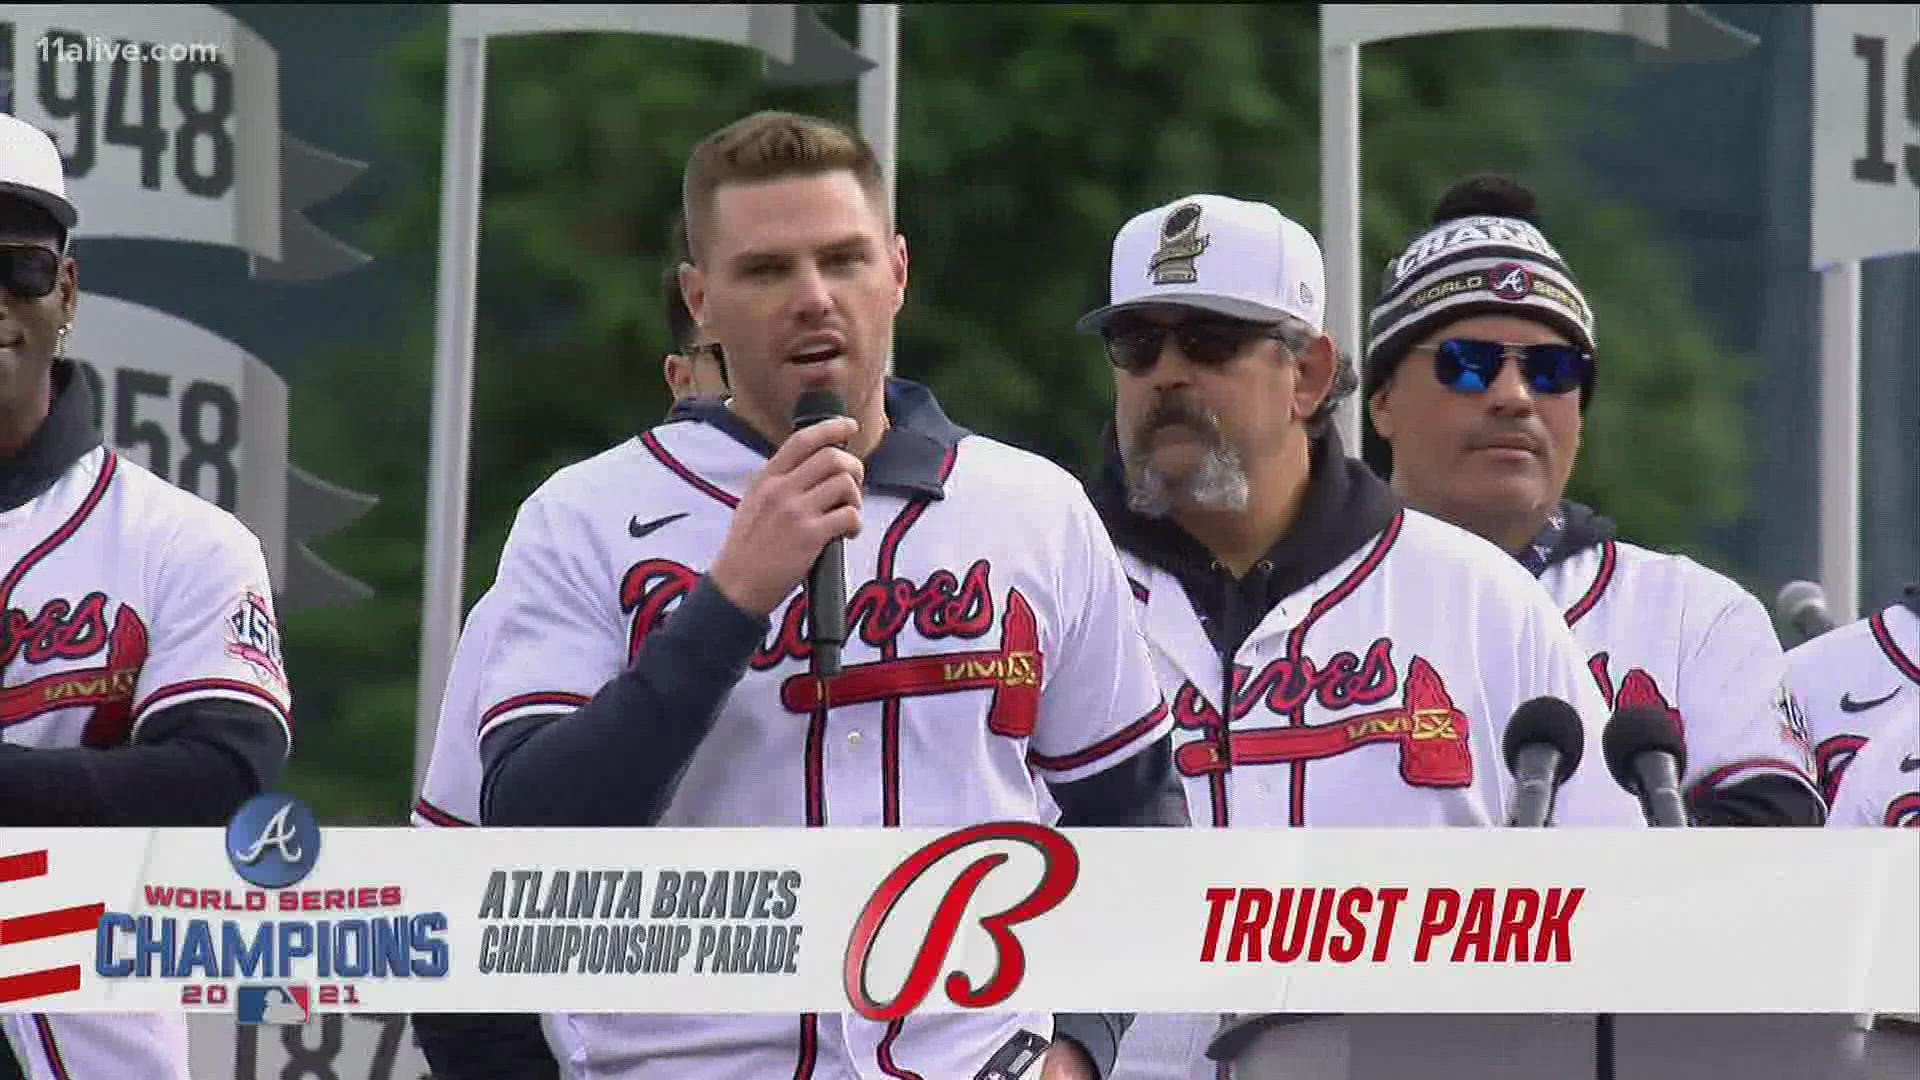 The Atlanta Braves are being honored in the Peach State for their 2021 World Series win. Friday featured a parade, concert and much more.